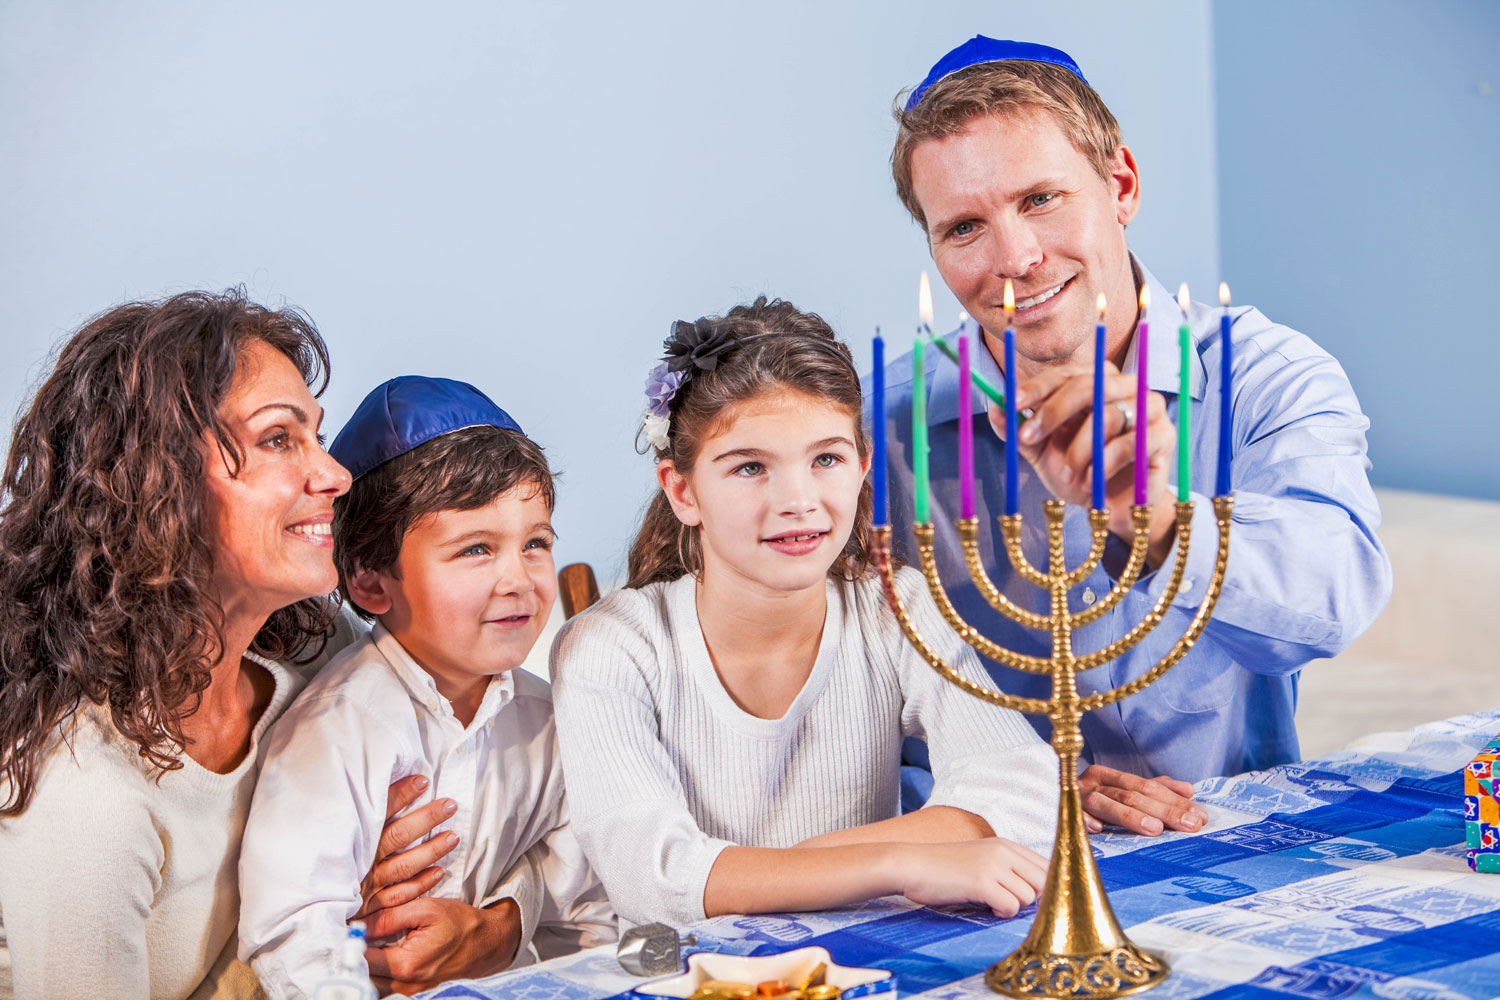 The meaning of the menorah - Menorahs are a prominent symbol of Chanukah, are seven-branched candelabras that have been used in Jewish worship since ancient times. #Menorah